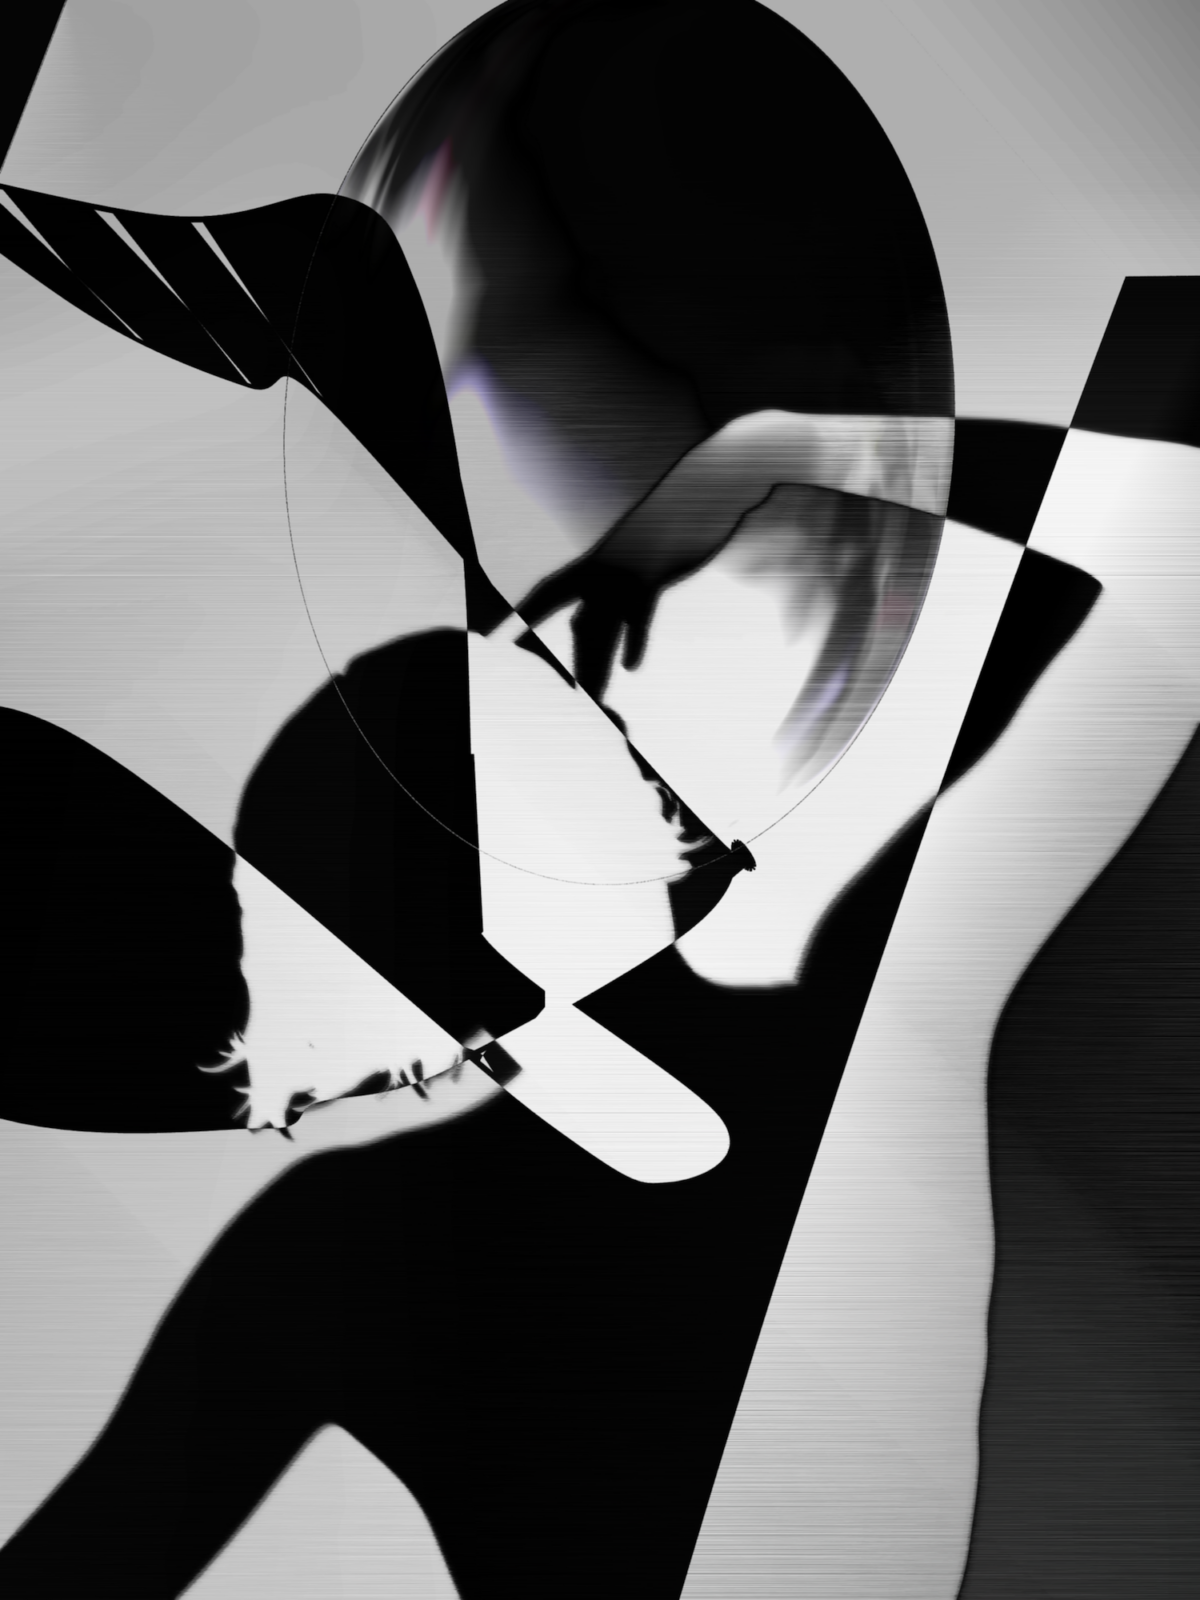 A black and white silhouette portrait or a woman dancing with abstract lines and circles over the top of the image.